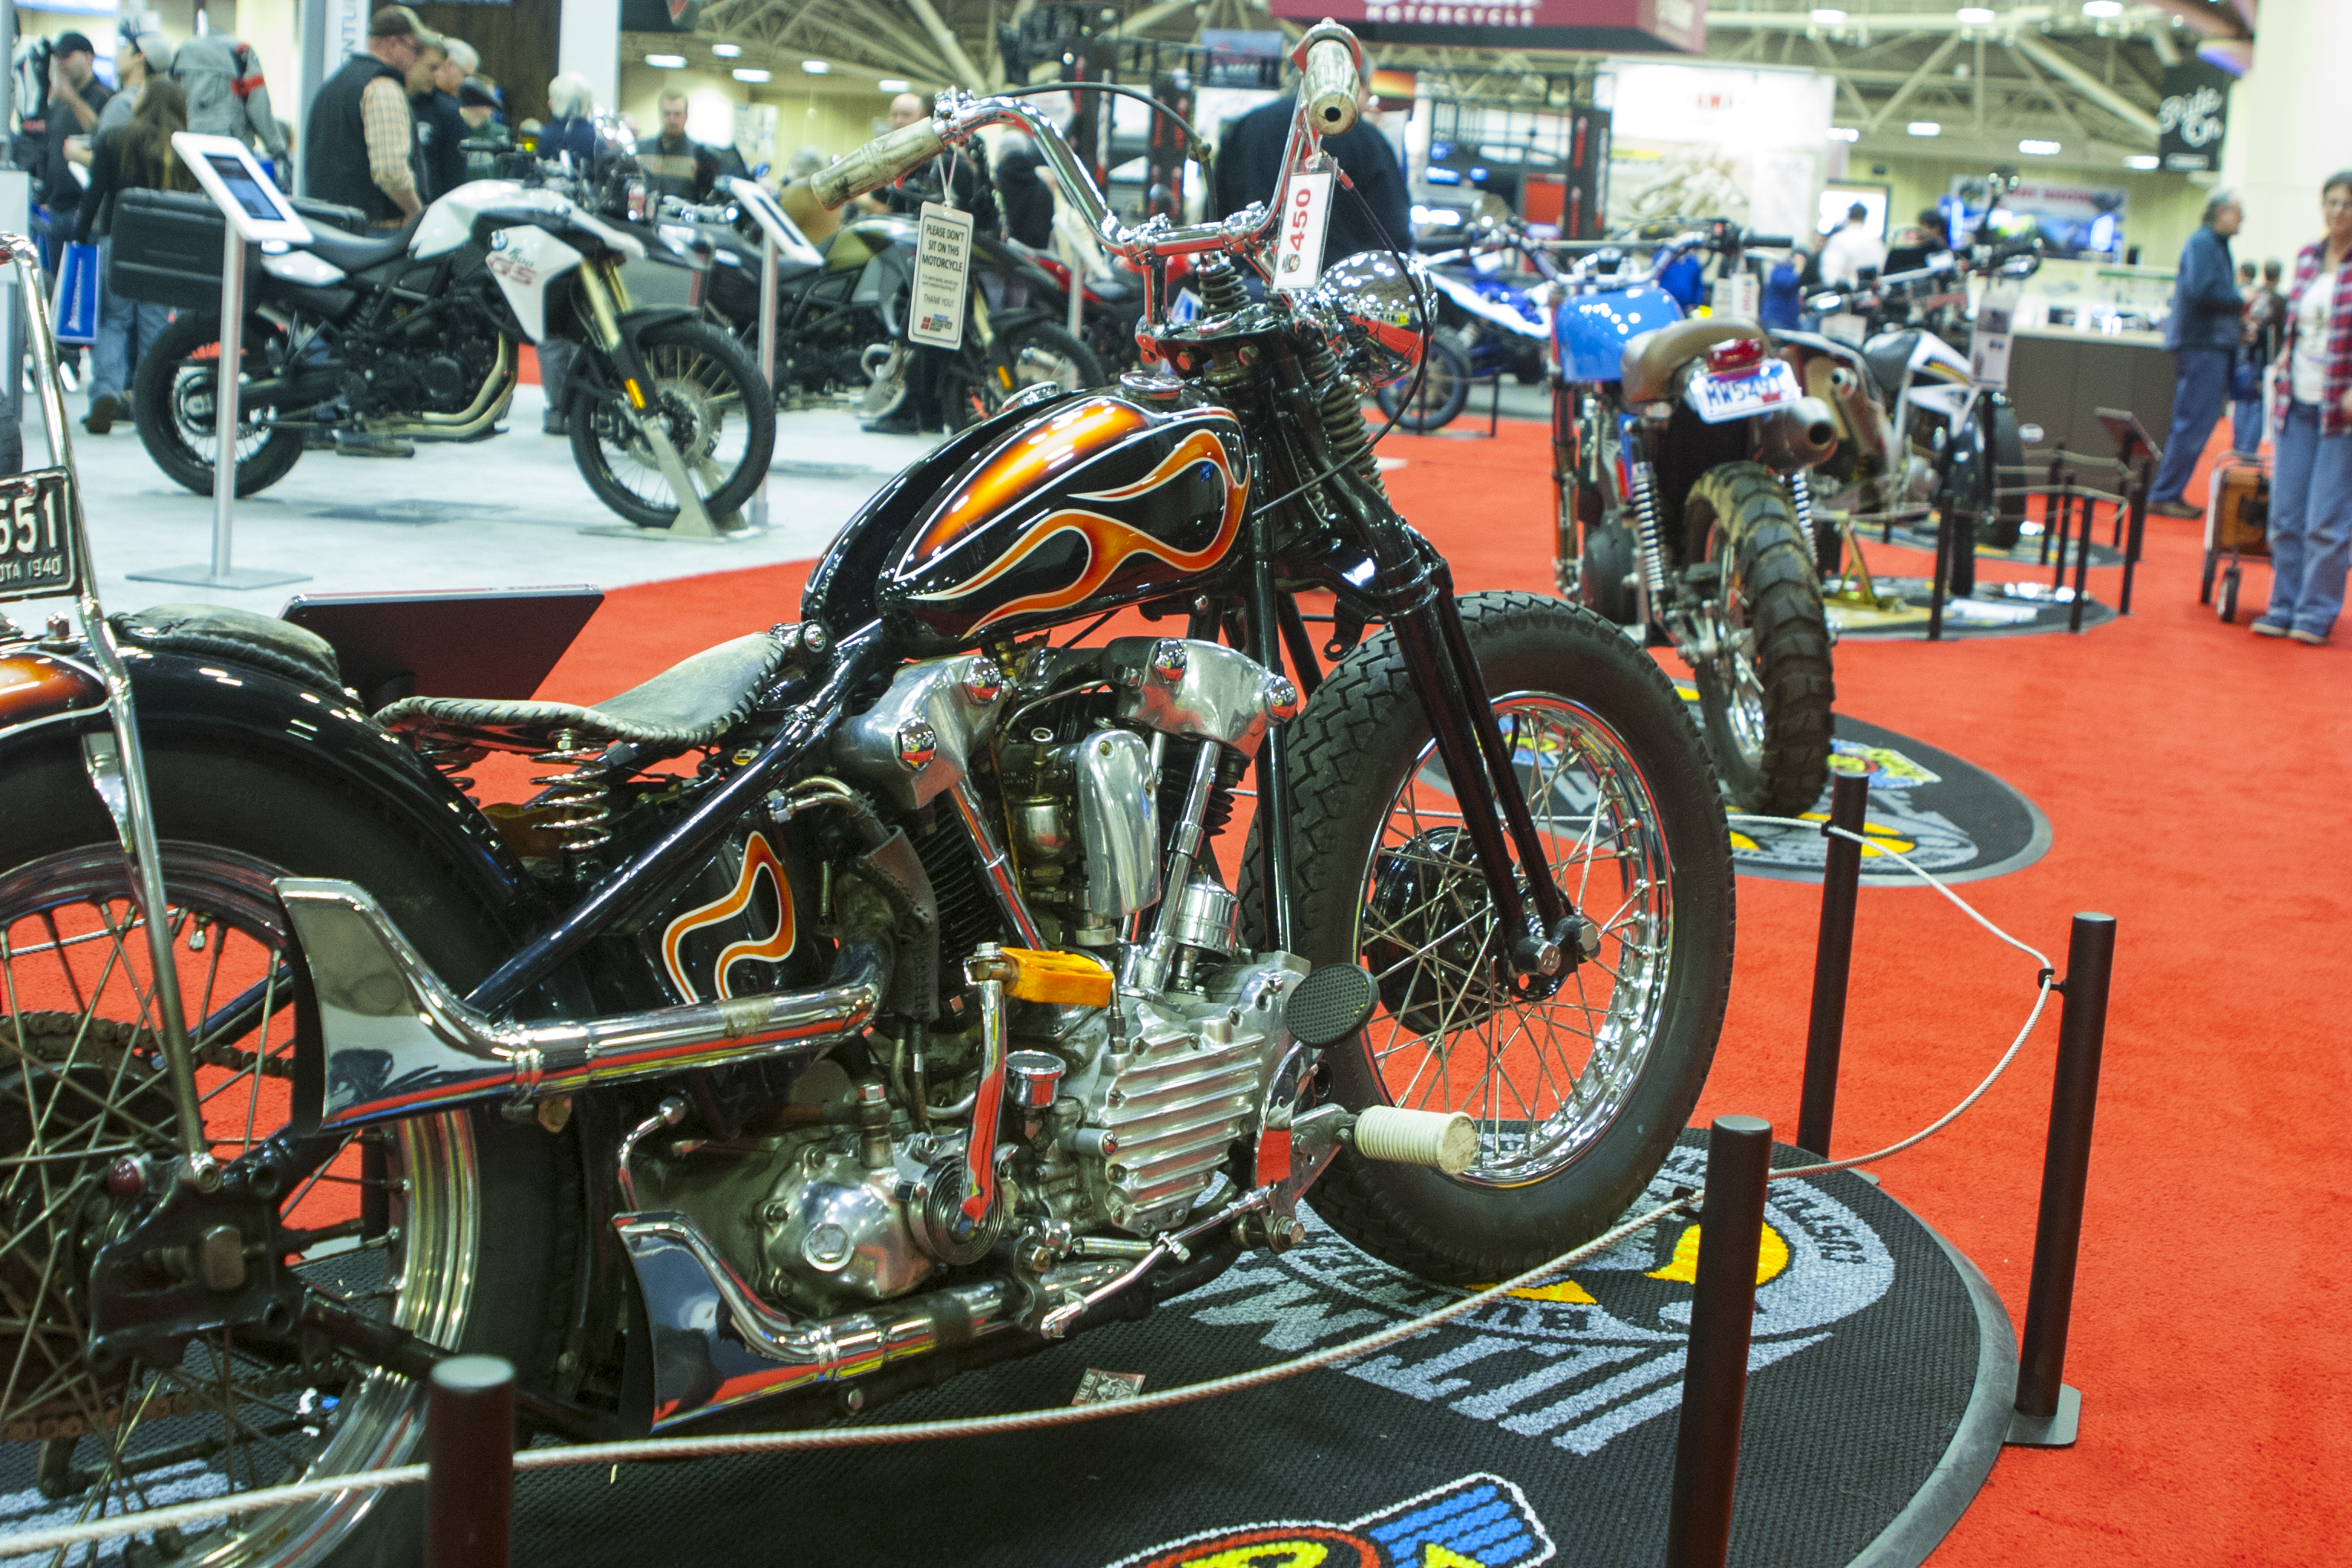 Highlights from the 2016 International Motorcycle Show